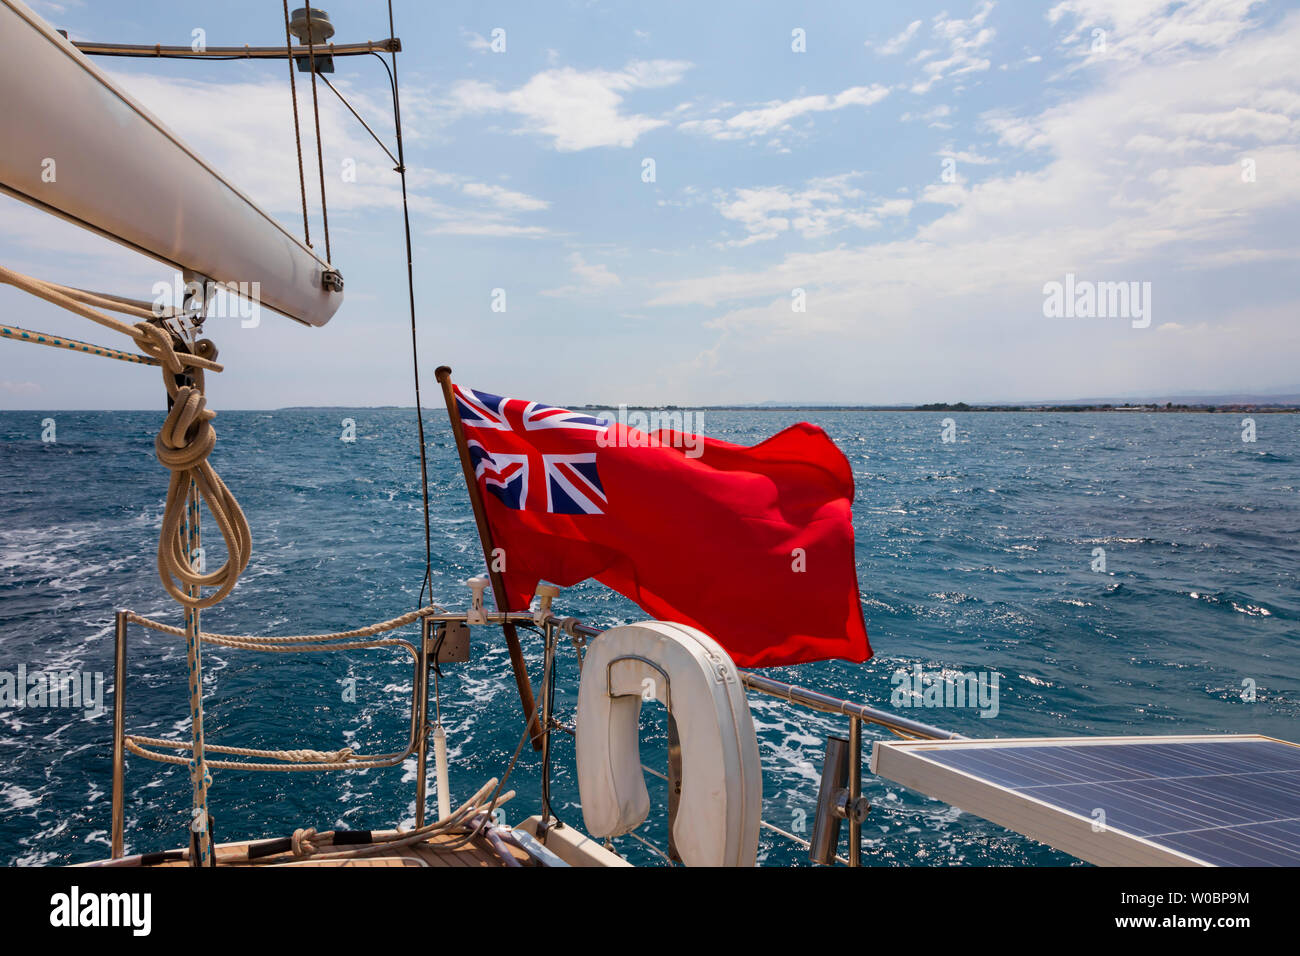 Sailing aboard a yacht in the Mediterranean Sea off the coast of Larnaca, Cyprus. Stock Photo